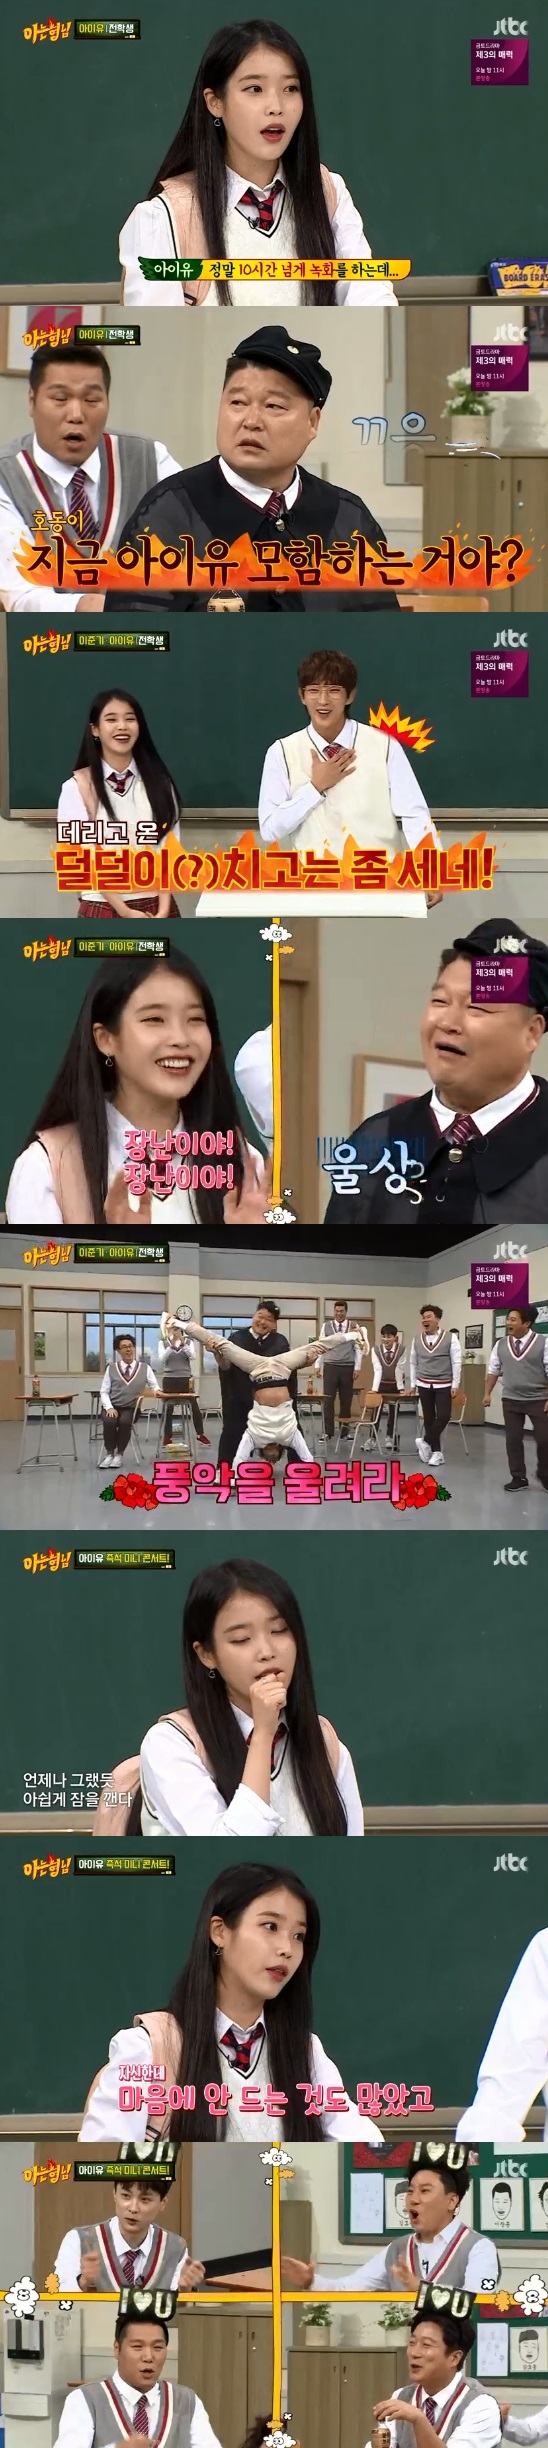 <p>IU and Lee Joon-gi appeared on JTBC Ai Brother broadcast on the 20th.</p><p>On this day, Kang Ho-dong cheered at the appearance of the IU and reported the anecdote he had met at a Chinese airport in the past. IU emphasized that he said I will appear on my brother I know.</p><p>However, IU reported an anecdote that was damaged by Kang Ho-dong when SBS stocking was recorded.</p><p>Kang Ho-dong said, When I was a newcomer, I went to stocking, and after 10 hours of recording, I did not even say a word. I wrote a diary, and from then on I was so keen that I could come here. </p><p>Especially, Kang Ho-dong was good to me after Good Day.</p><p>IU and Lee Joon-gi have been breathing in the past BoBo Senseo.</p><p>IU said, This is the 10th anniversary of my debut, but I do not have any broadcasting activities this time, but I was worried that it would be broadcast to Nojam because I was in my brother. So I asked Lee Joon-gi,</p><p>Lee Joon-gi has a relationship with Kang Ho-dong in Knee Pocket Master in the past. He said, When I have many things I want to talk to the public, I enthusiastically embraced it and hugged it.</p><p>There were many episodes between the two and Kang Ho-dong. IU and Kang Ho-dong used to shoot commercials in the past.</p><p>IU said, When you fall 100 times, you have to do 101 to survive. But I was not in a difficult situation, so I reacted vaguely, but if you think about it, Kang Ho-dong is right. I was able to. </p><p>IU, Lee Joon-gi, boasted various charms. Lee Joon-gi boasted a flexible body and IU made the concert hall a concert hall with a pure voice.</p><p>IU said, I did not like me for a long time, I had a lot of things I did not like, but recently I got better and I want to be born even if I am born again.</p><p>The IU cited its strengths as head clerk. I learned Yohji from Lee Hyori in Hyoris Homestay and learned how to stand on the water. IU said, I do not really have any motor skills.</p><p>Lee Joon-gi surprised everyone by exhibiting long-term organs such as leg tearing, kicking, and hip walking. At this time, Kang Ho-dong was kicked by Lee Joon-gi.</p>